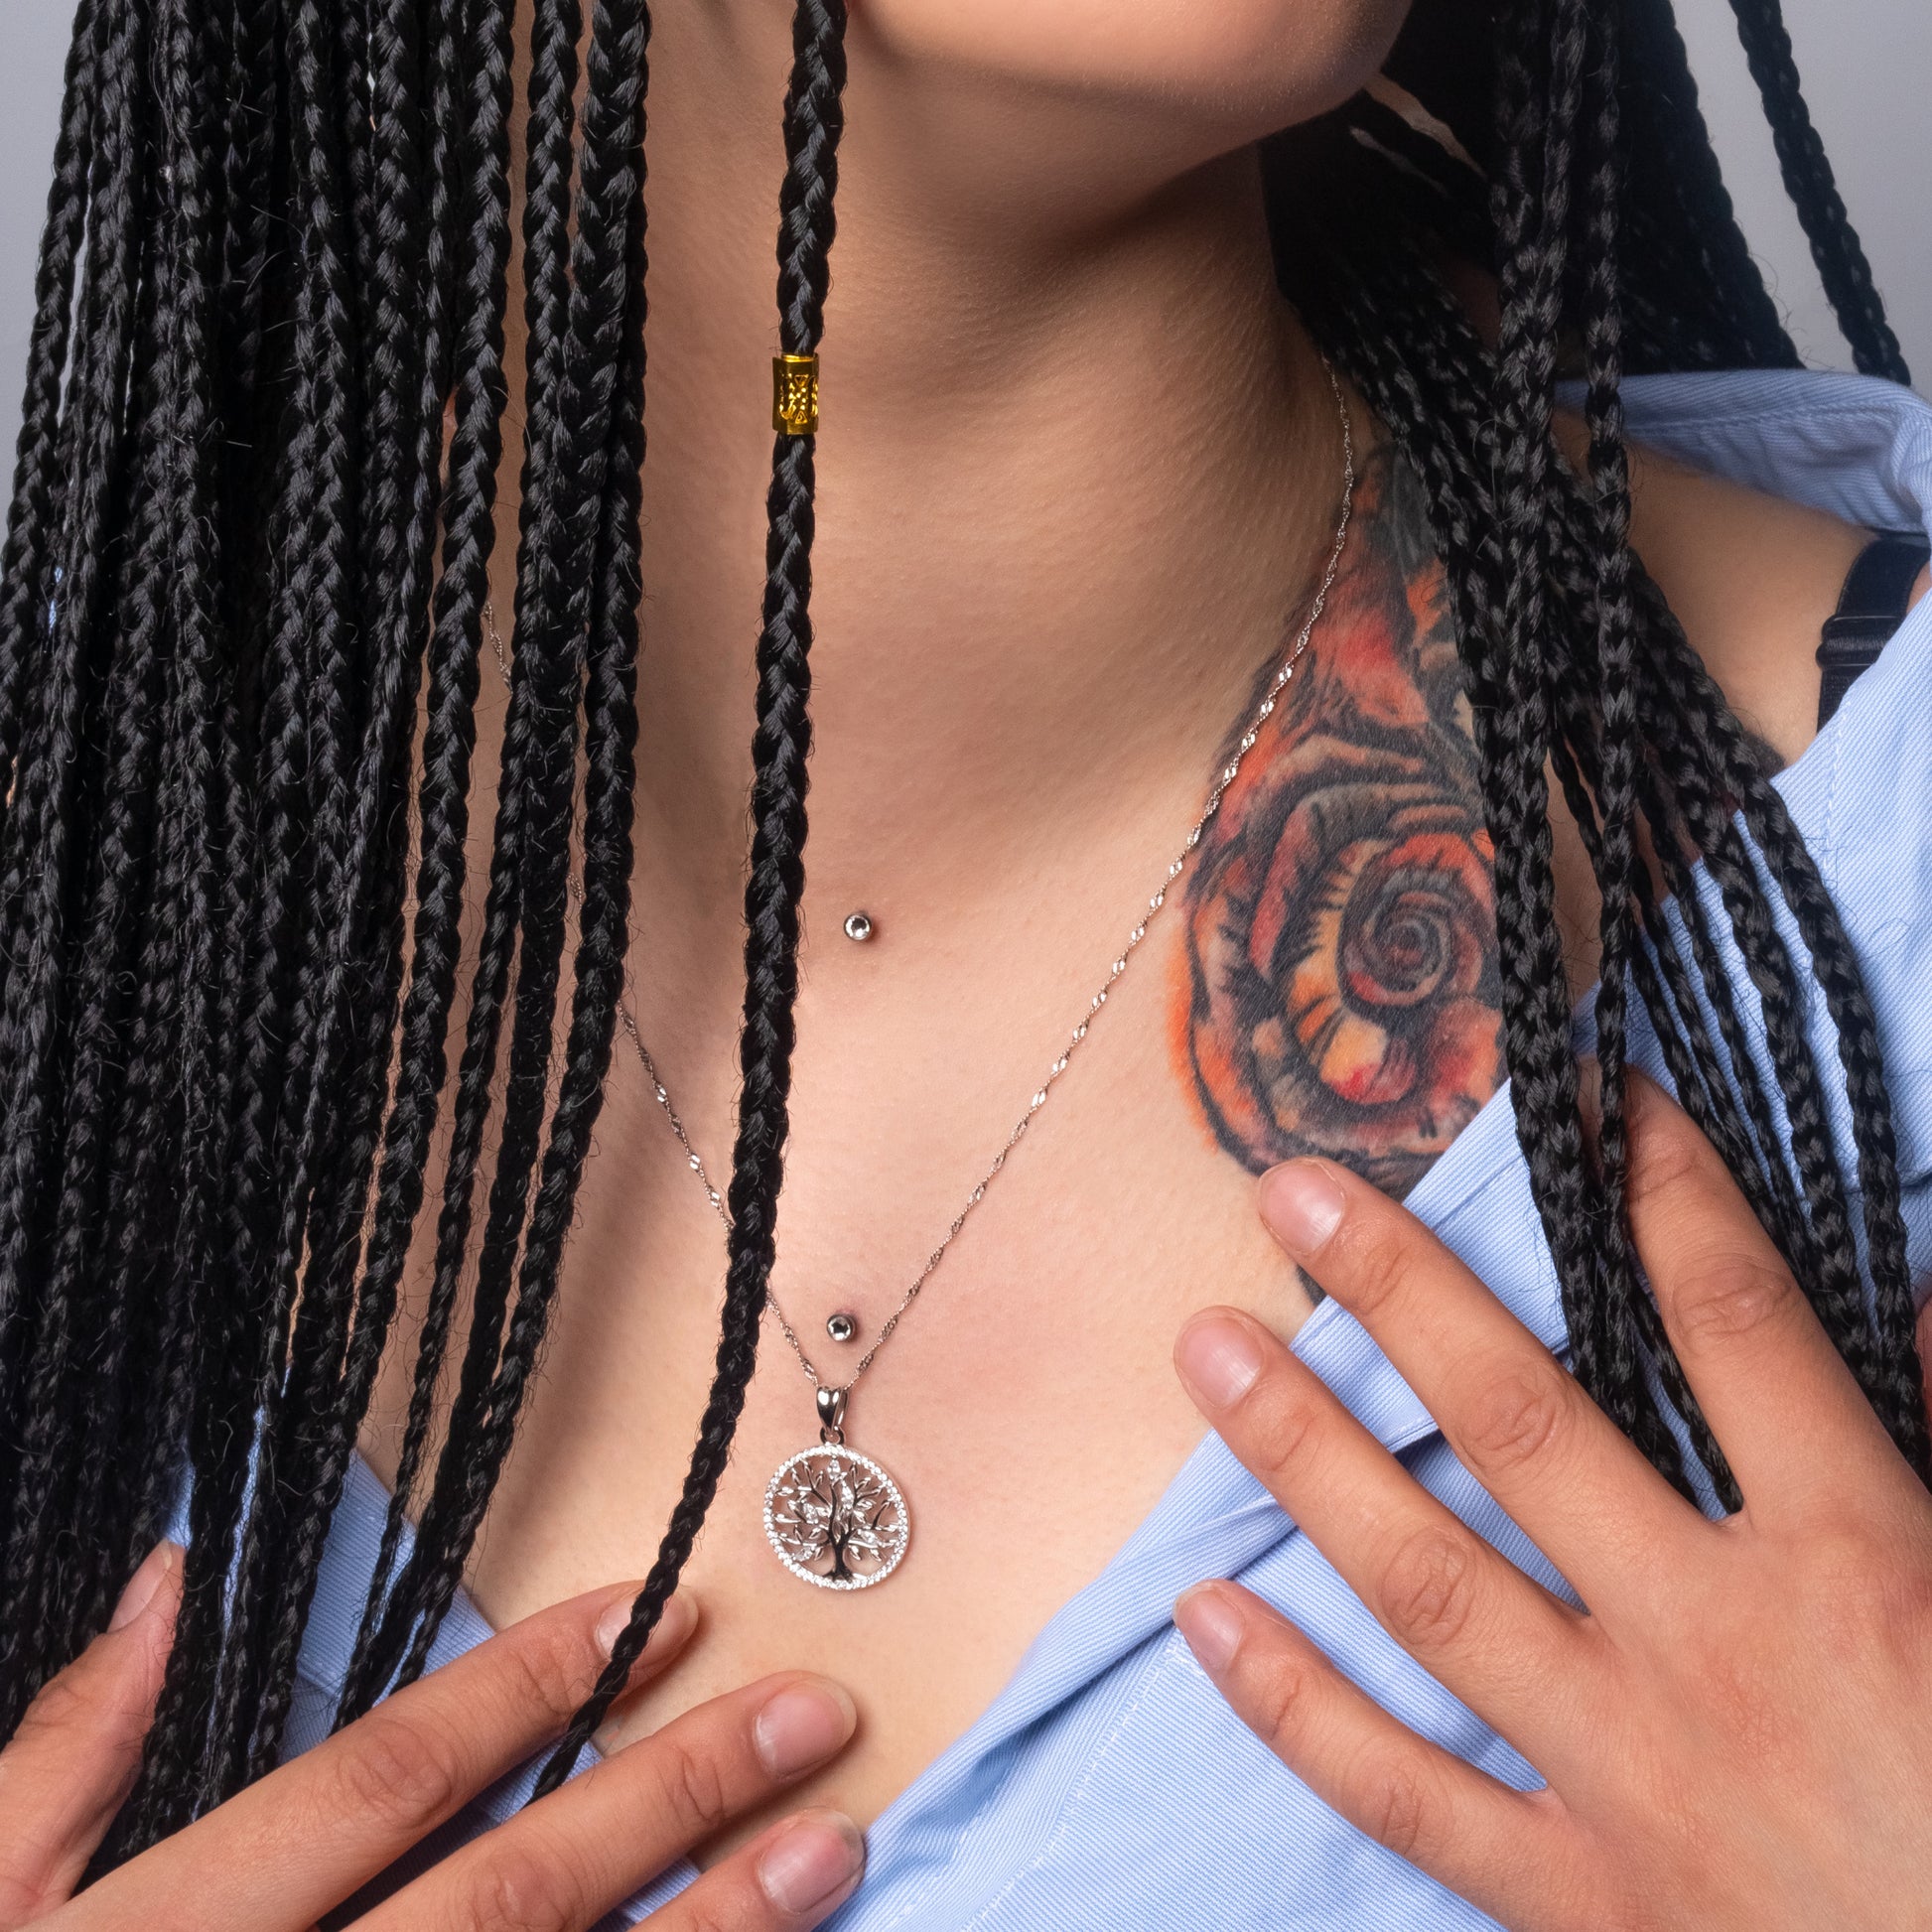 Model wearing Iced Tree of Life Silver Pendant with Water Wave Necklace.